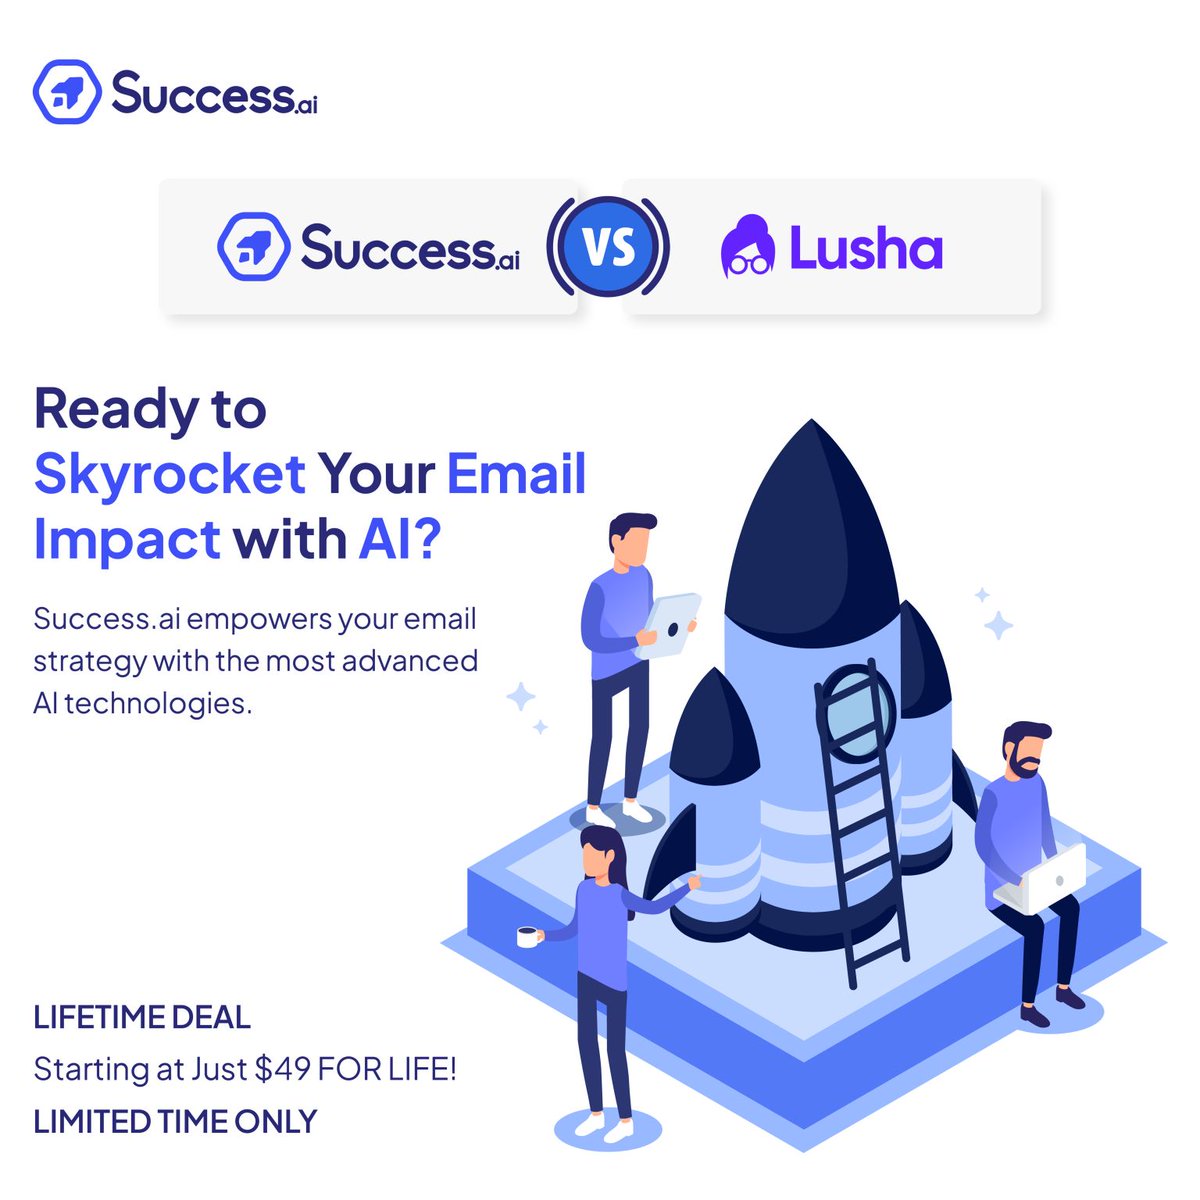 Upgrade your email strategy with Success.ai's advanced AI. Compare with Lusha.com here: success.ai/success-ai-vs-…

 Limited-time lifetime deal: appsumo.com/products/succe…

#AIEmailEfficiency #EmailOutreach #SuccessAi #Lusha #EmailCampaigns